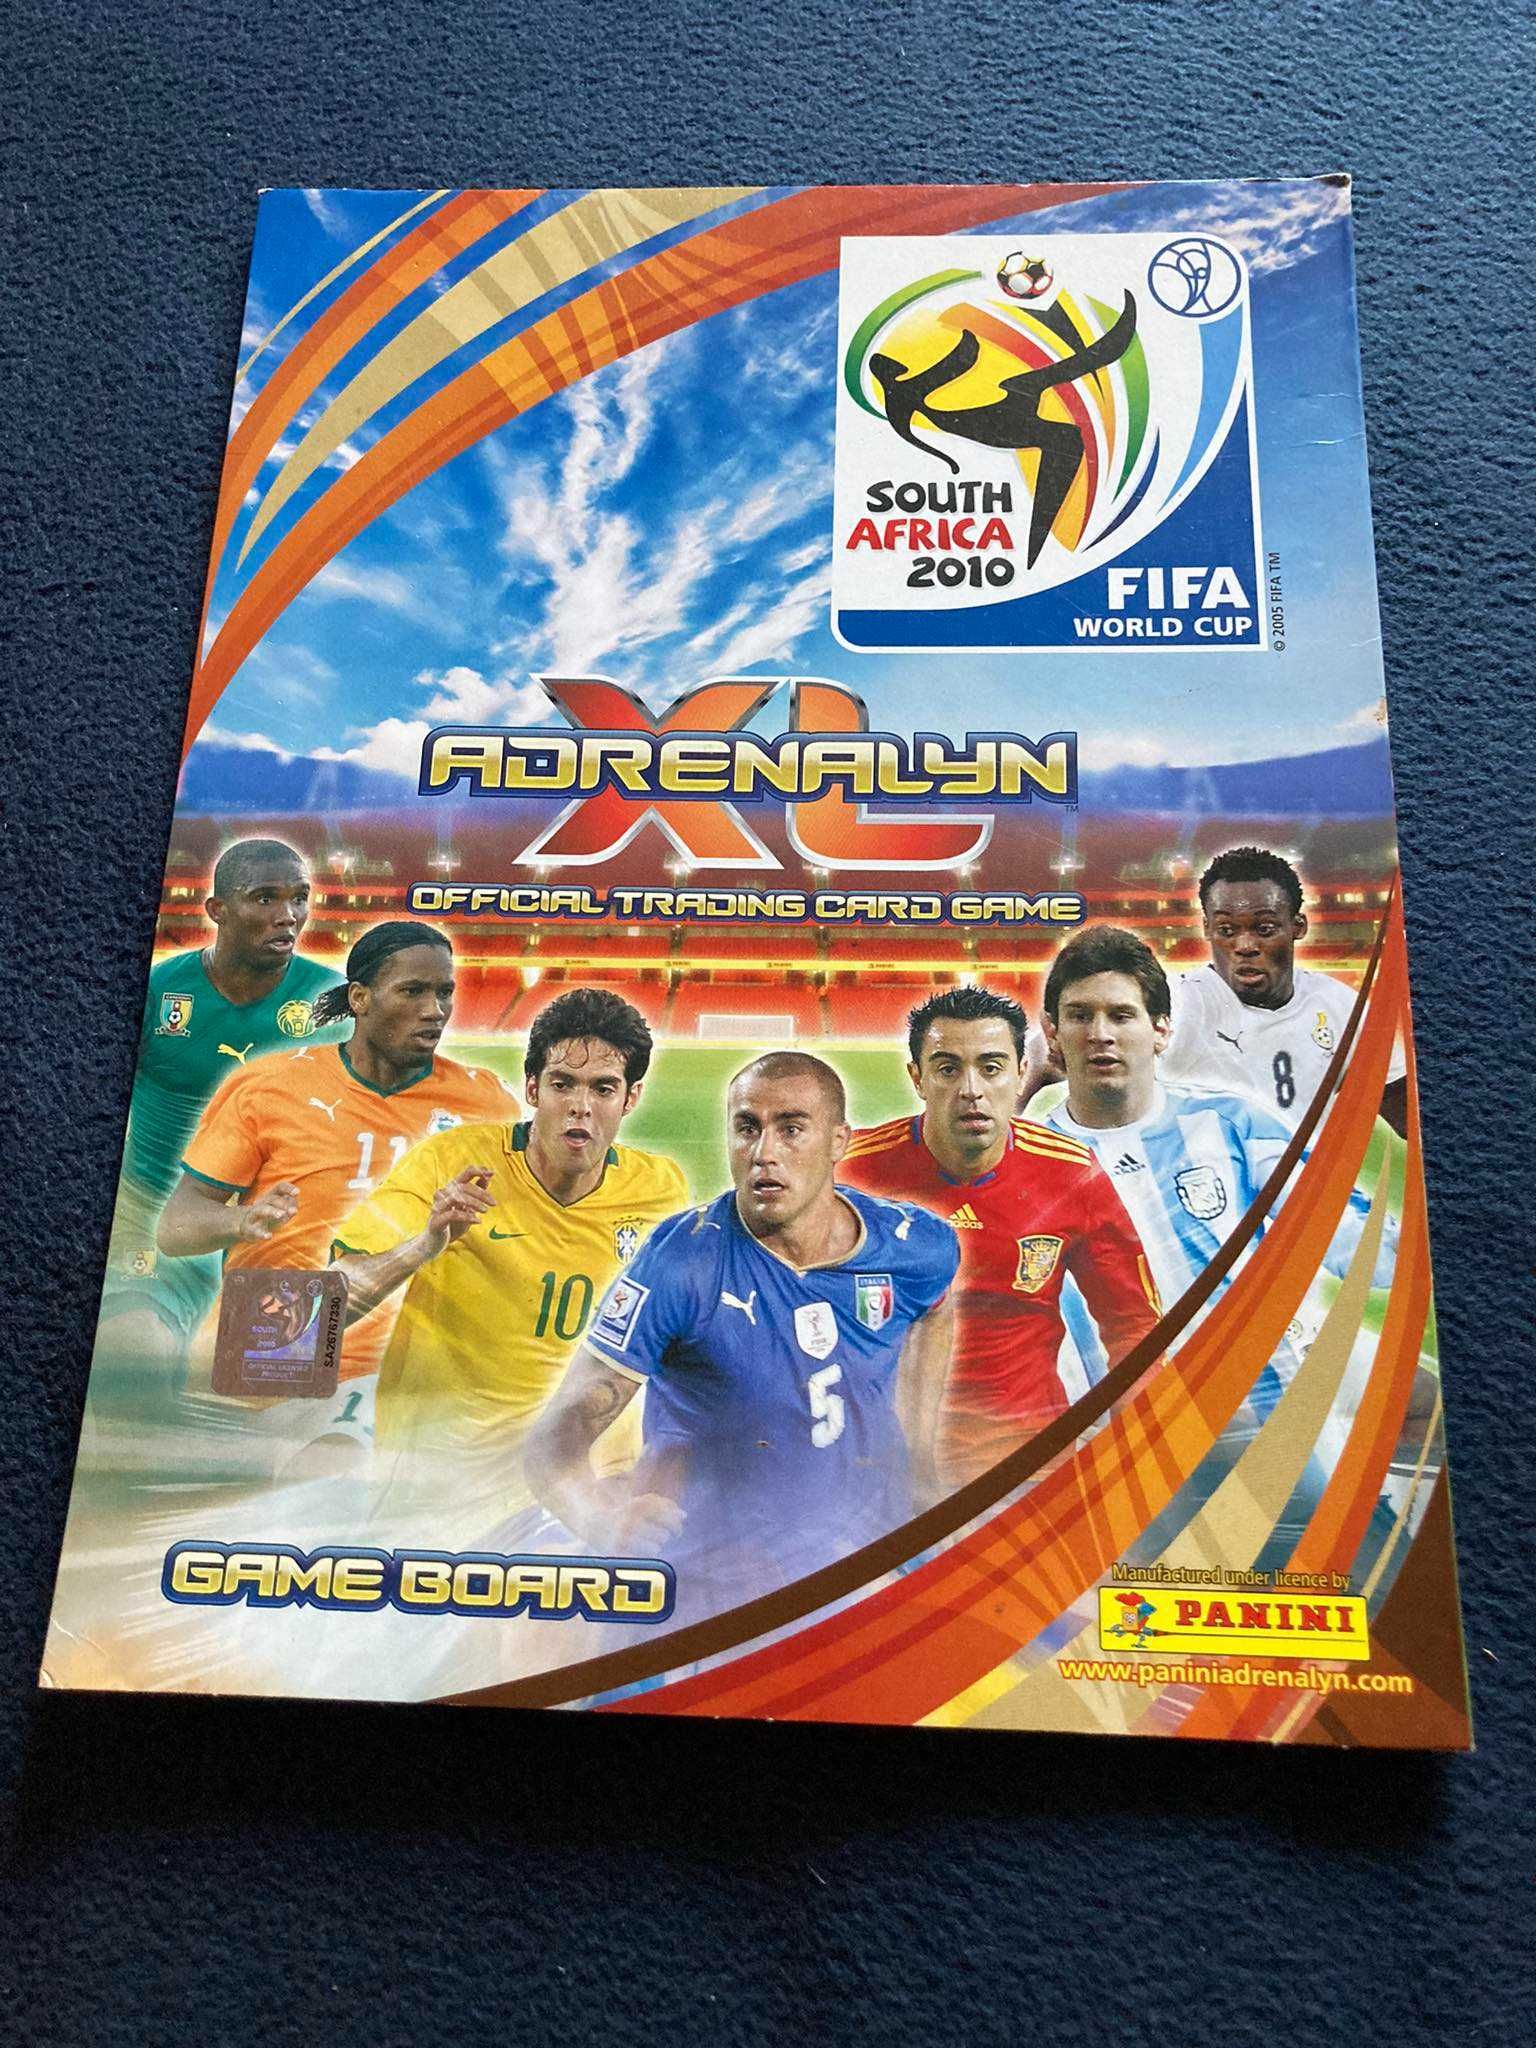 Plansza do gry Game Board Panini FIFA World Cup 2010 South Africa